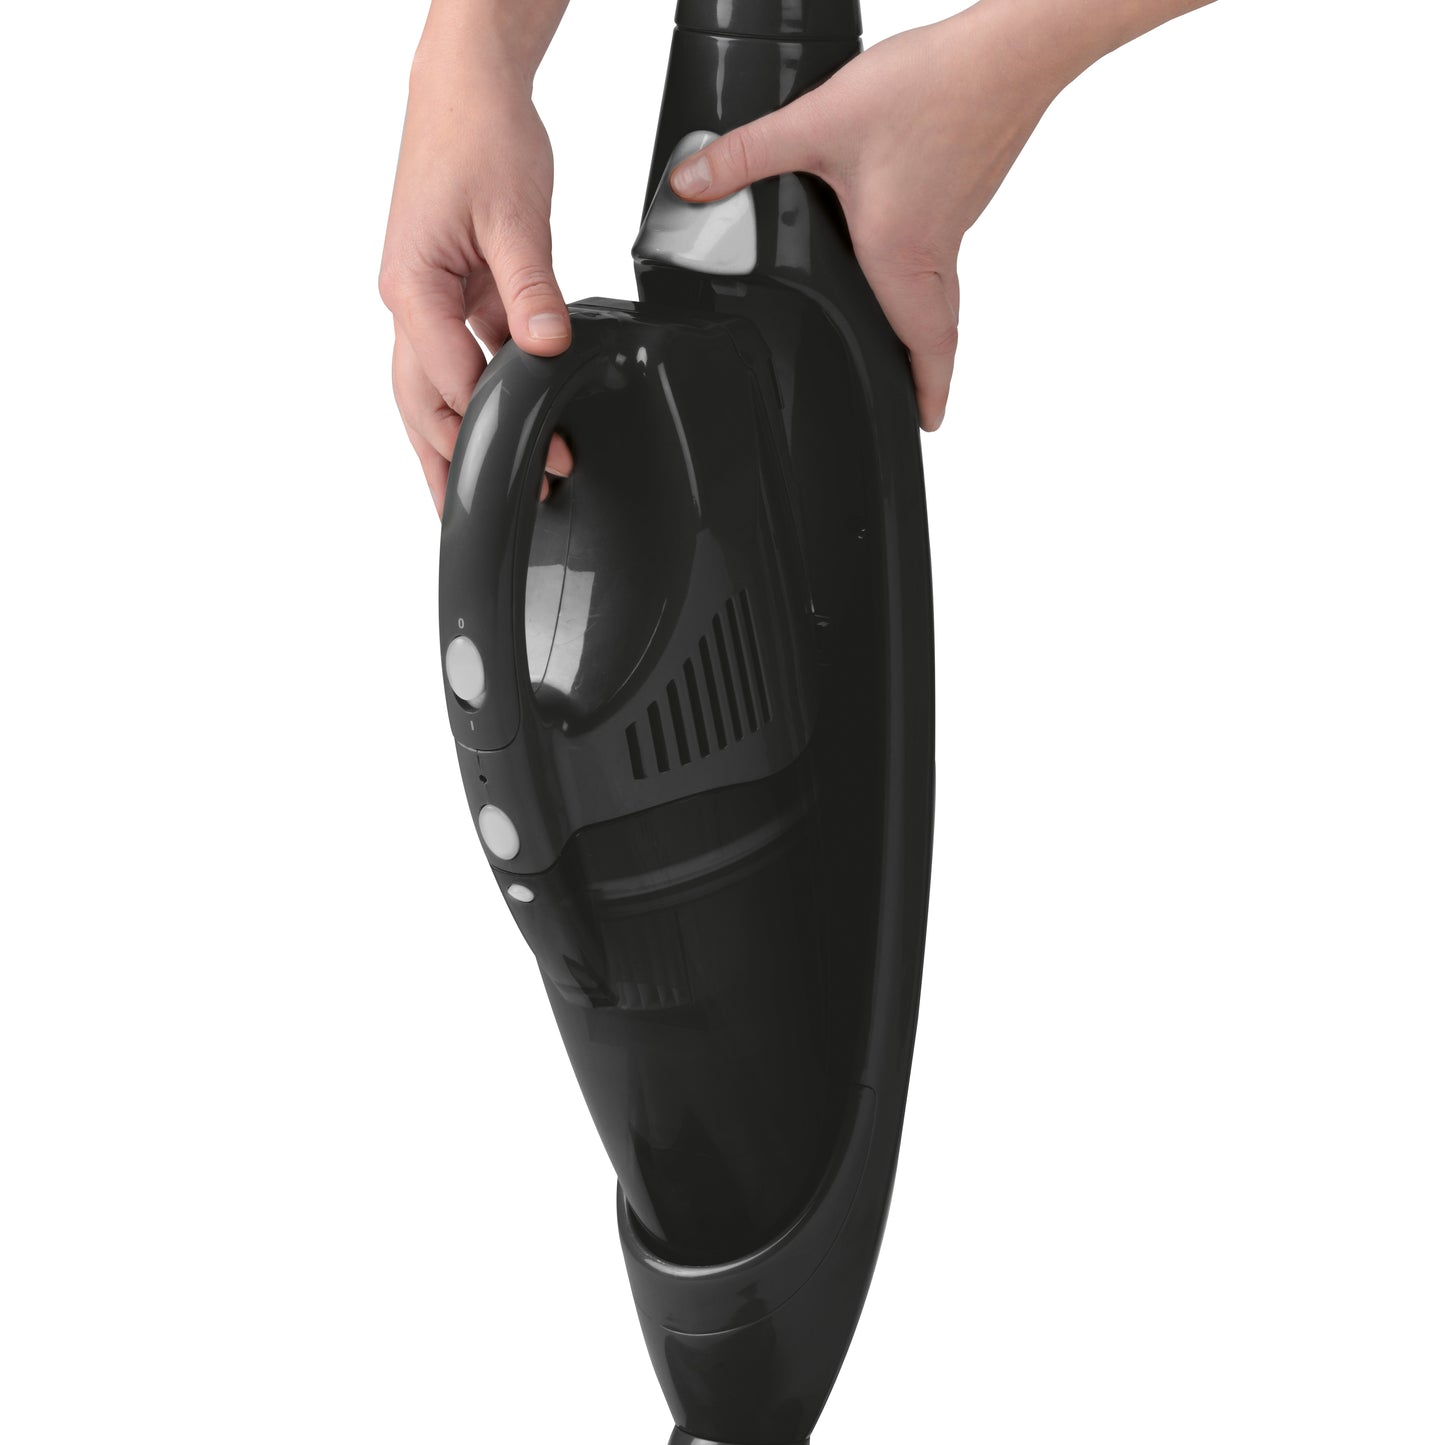 Montiss CVC635 Chicago - Cordless, rechargeable 2-in-1 Vacuum Cleaner with wet and dry functions - Black